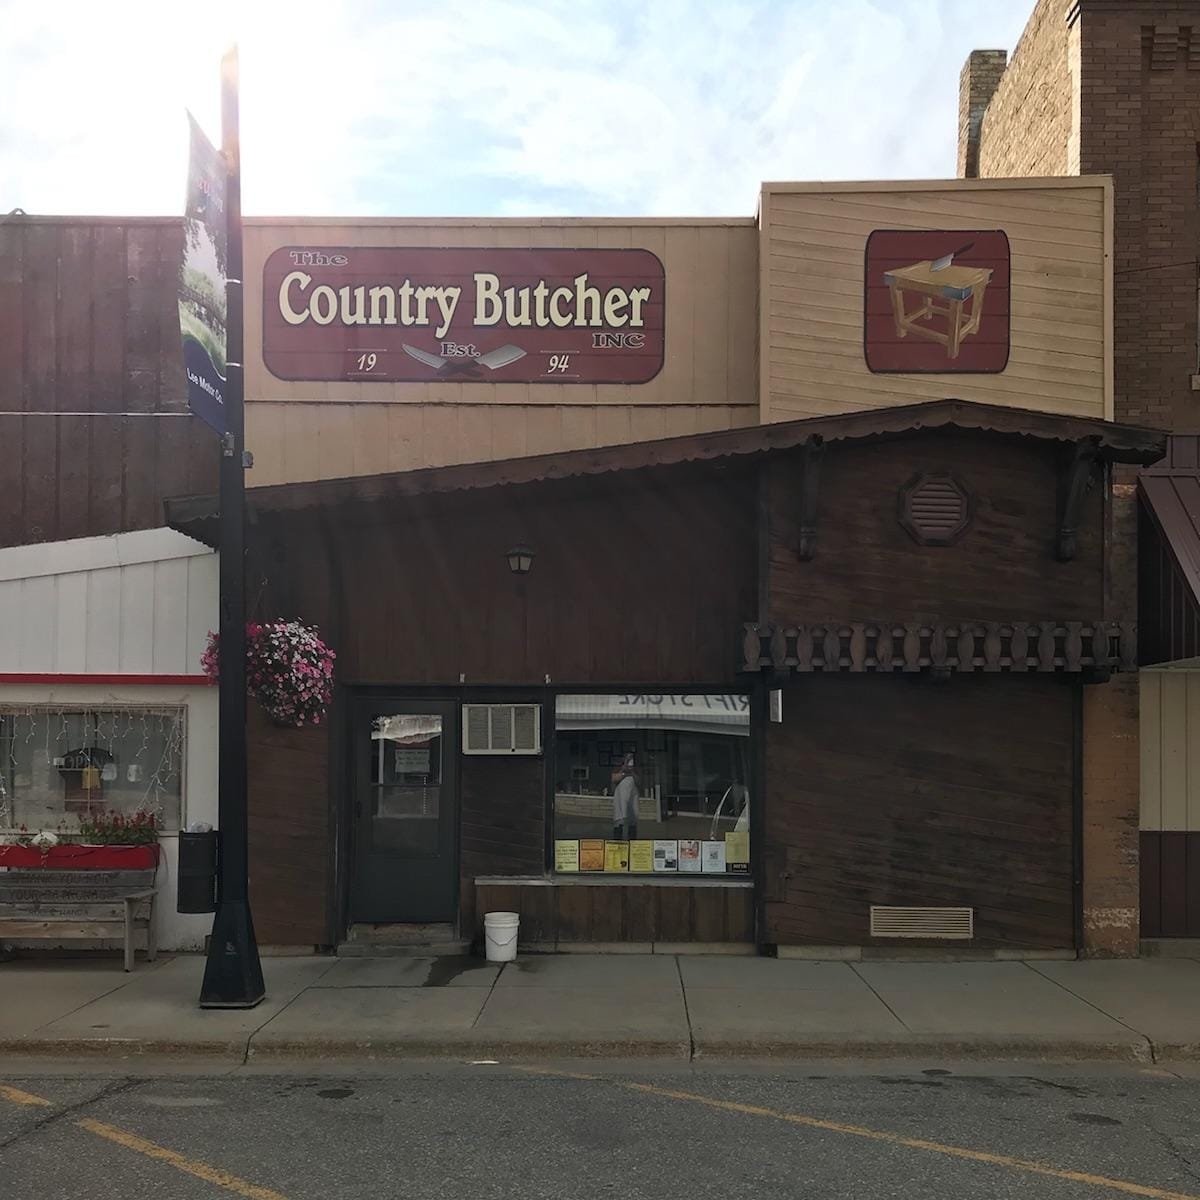 The Country Butcher Storefront